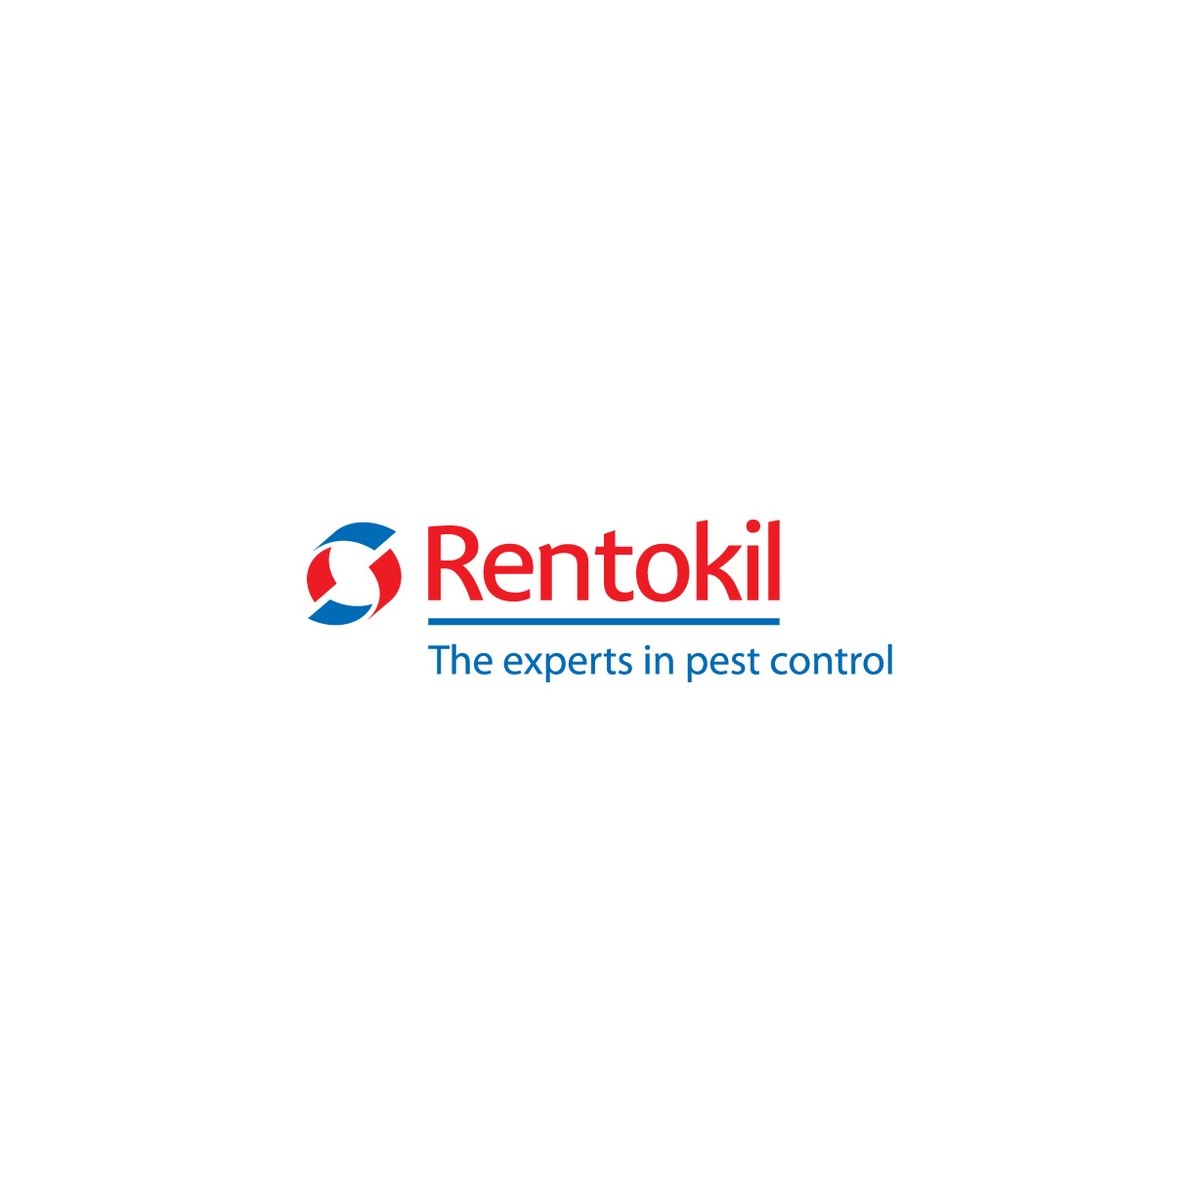 Where to Buy Rentokil Products